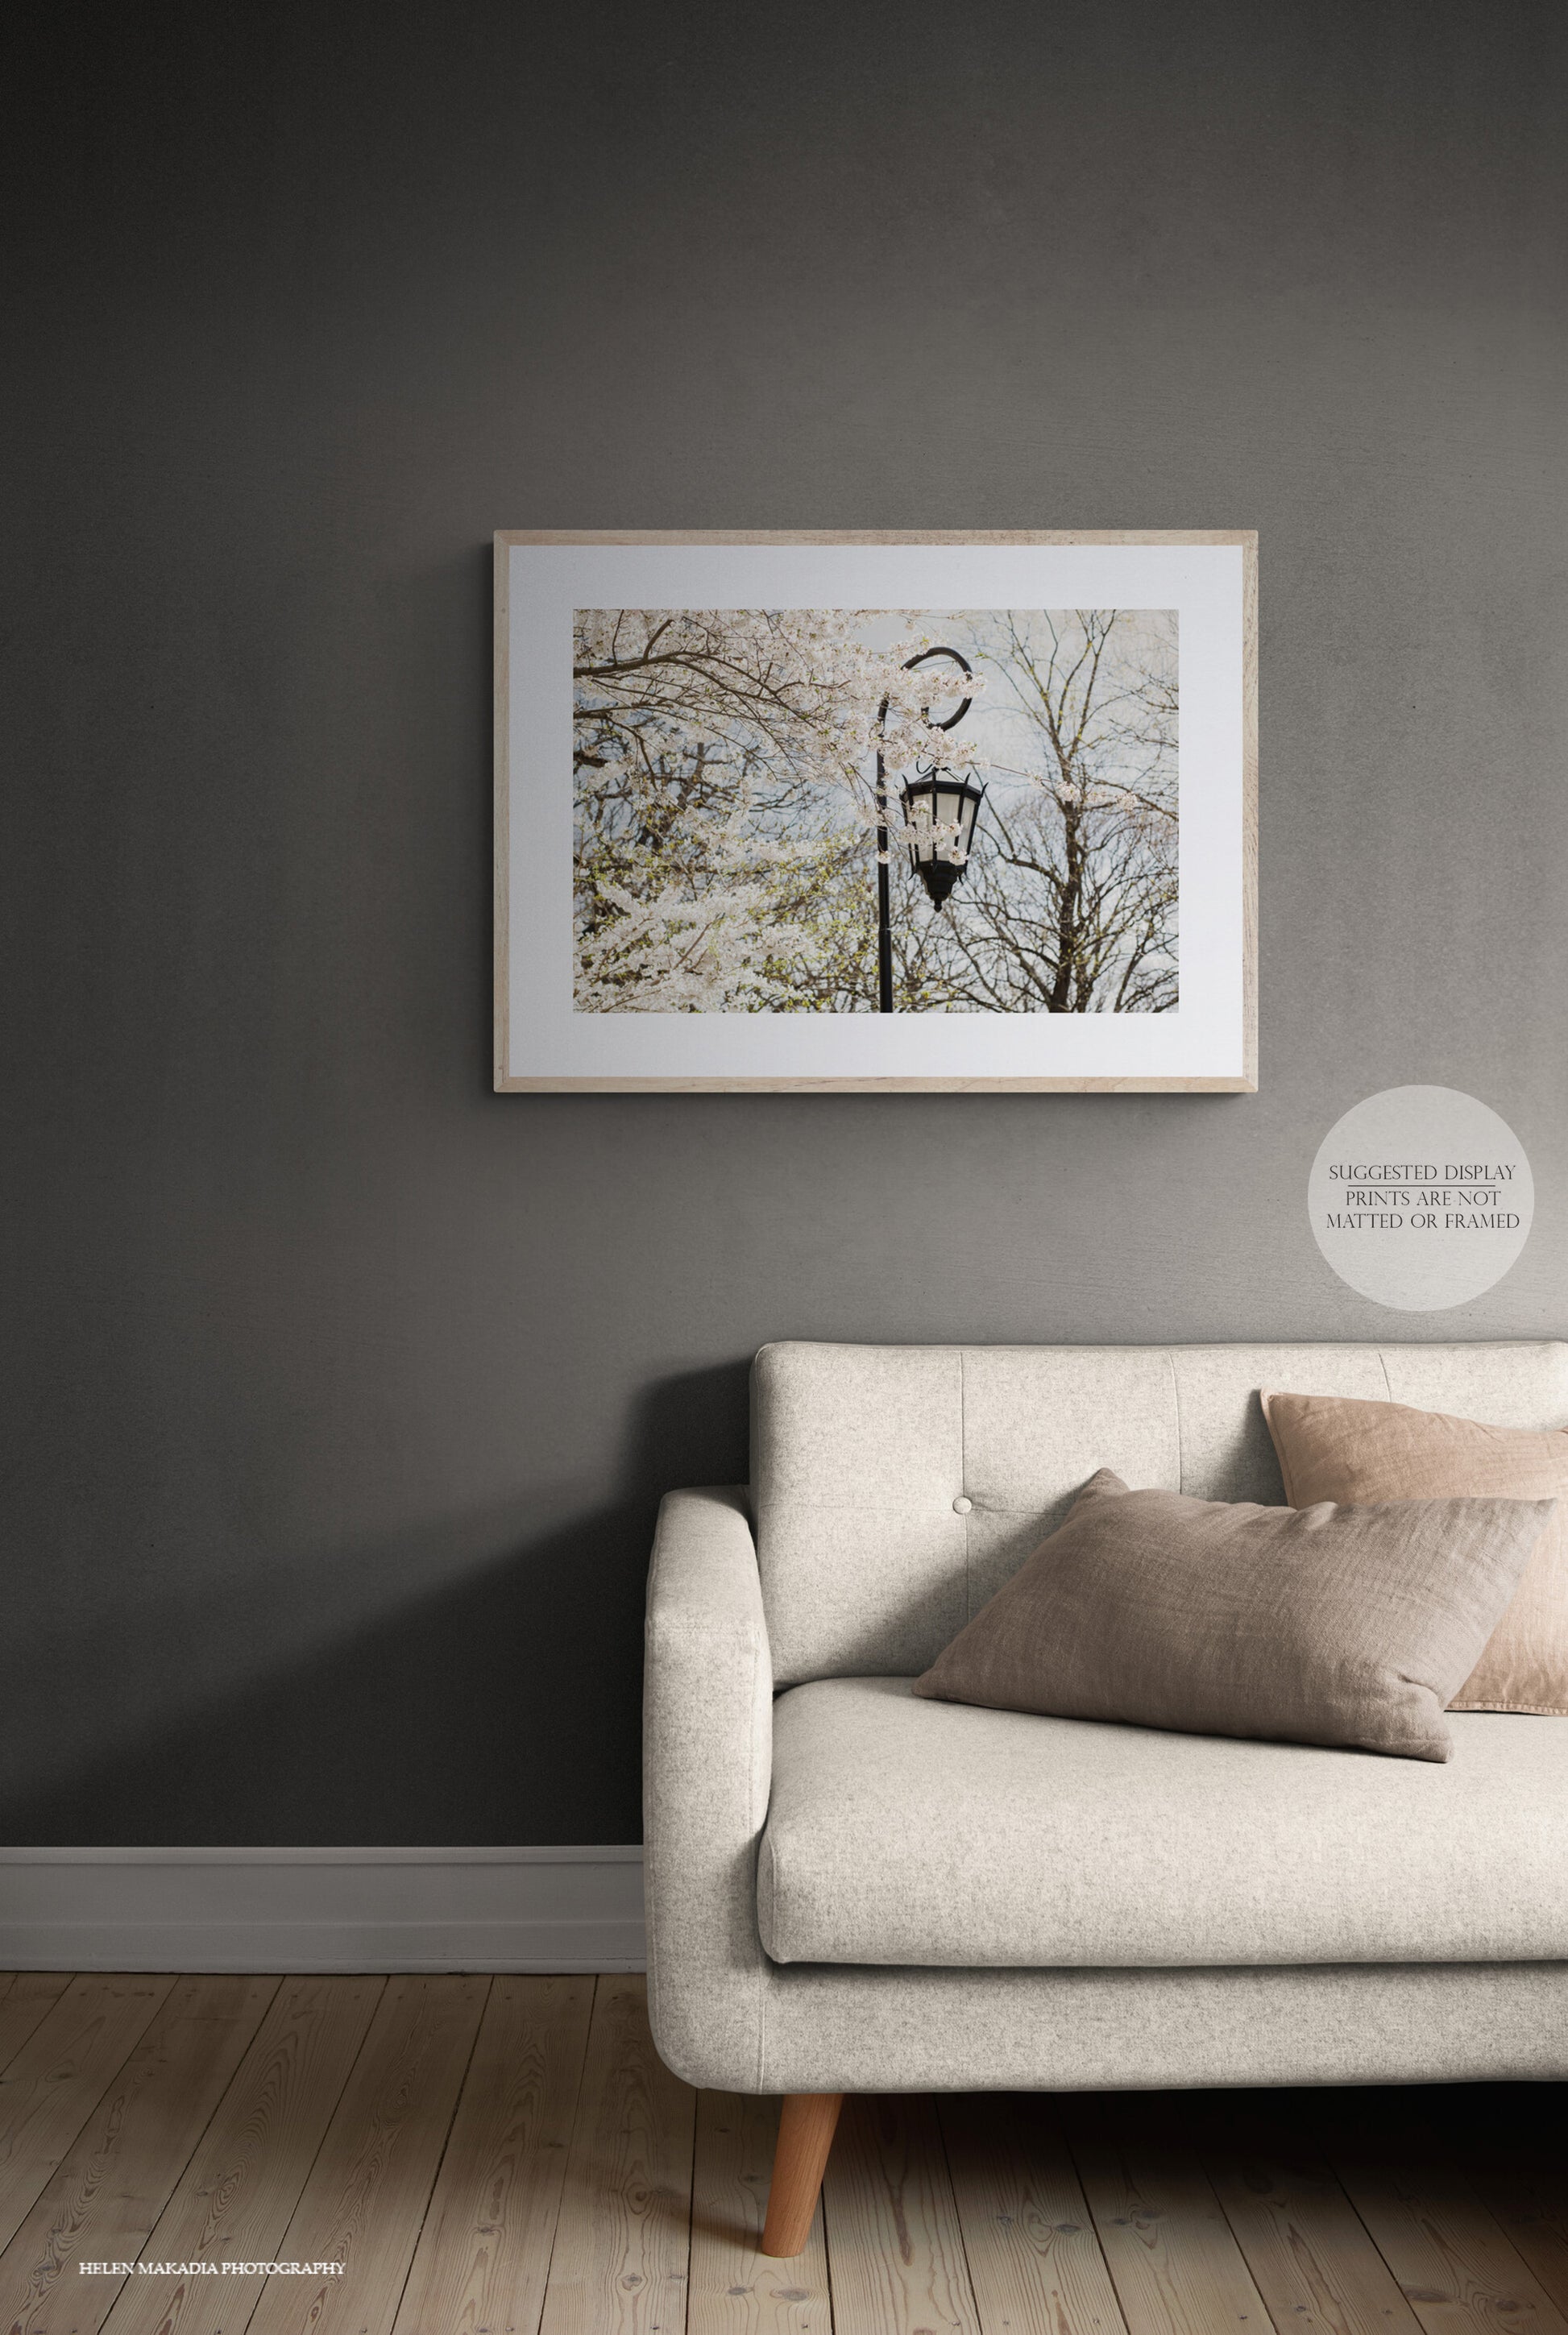 Framed Photograph of Wellesley College Lantern amongst white blossoms in springtime shown in a living room